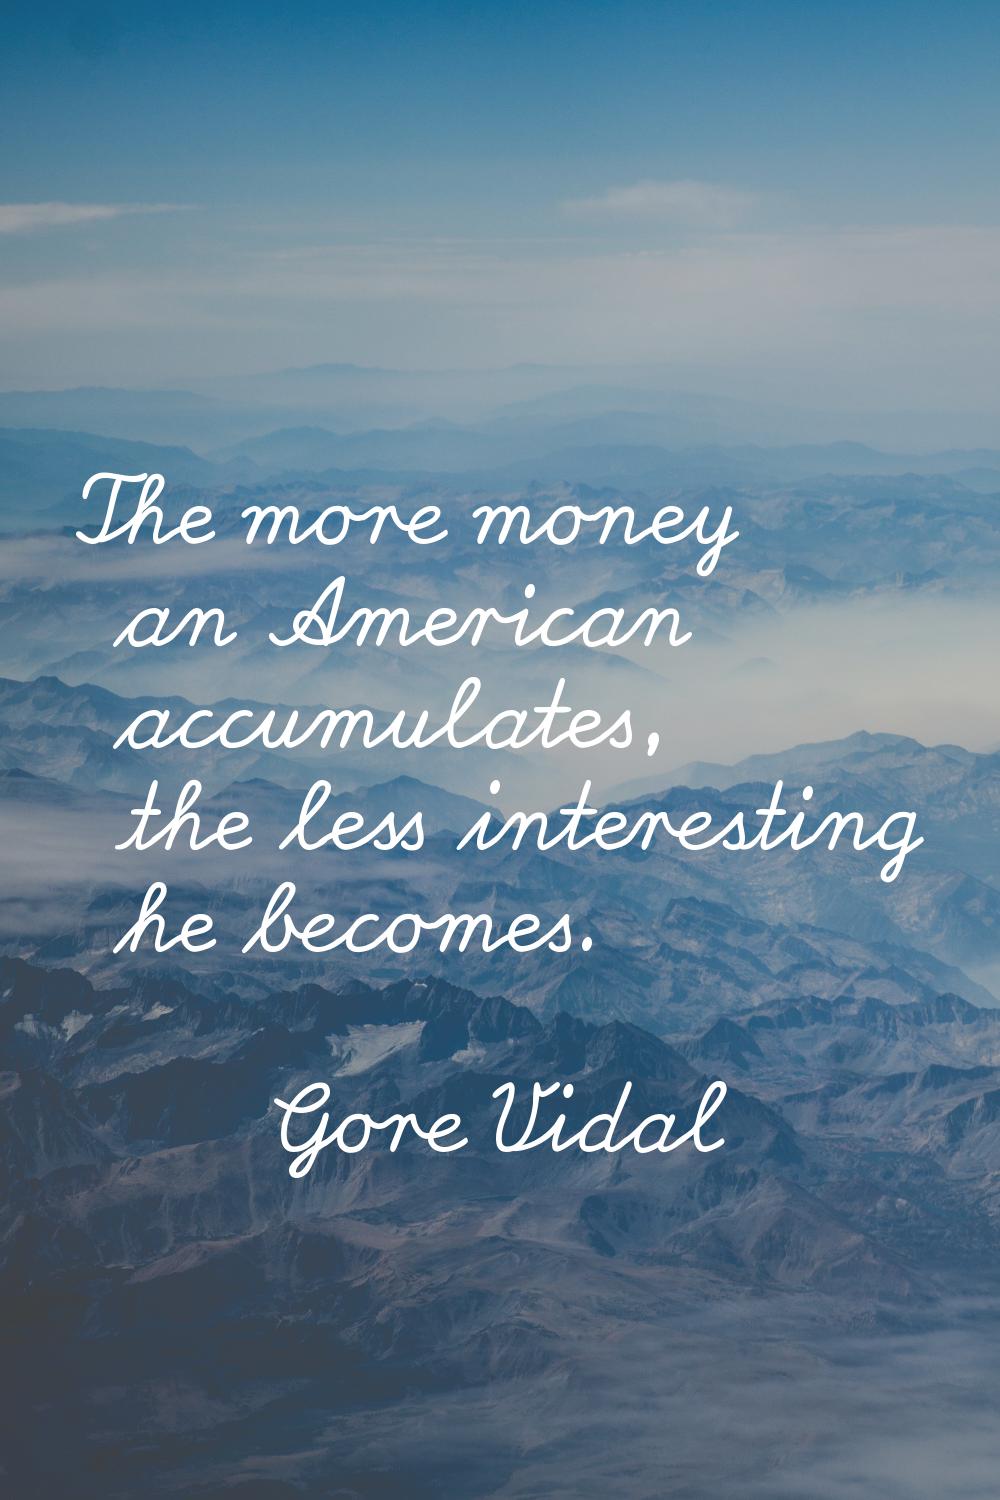 The more money an American accumulates, the less interesting he becomes.